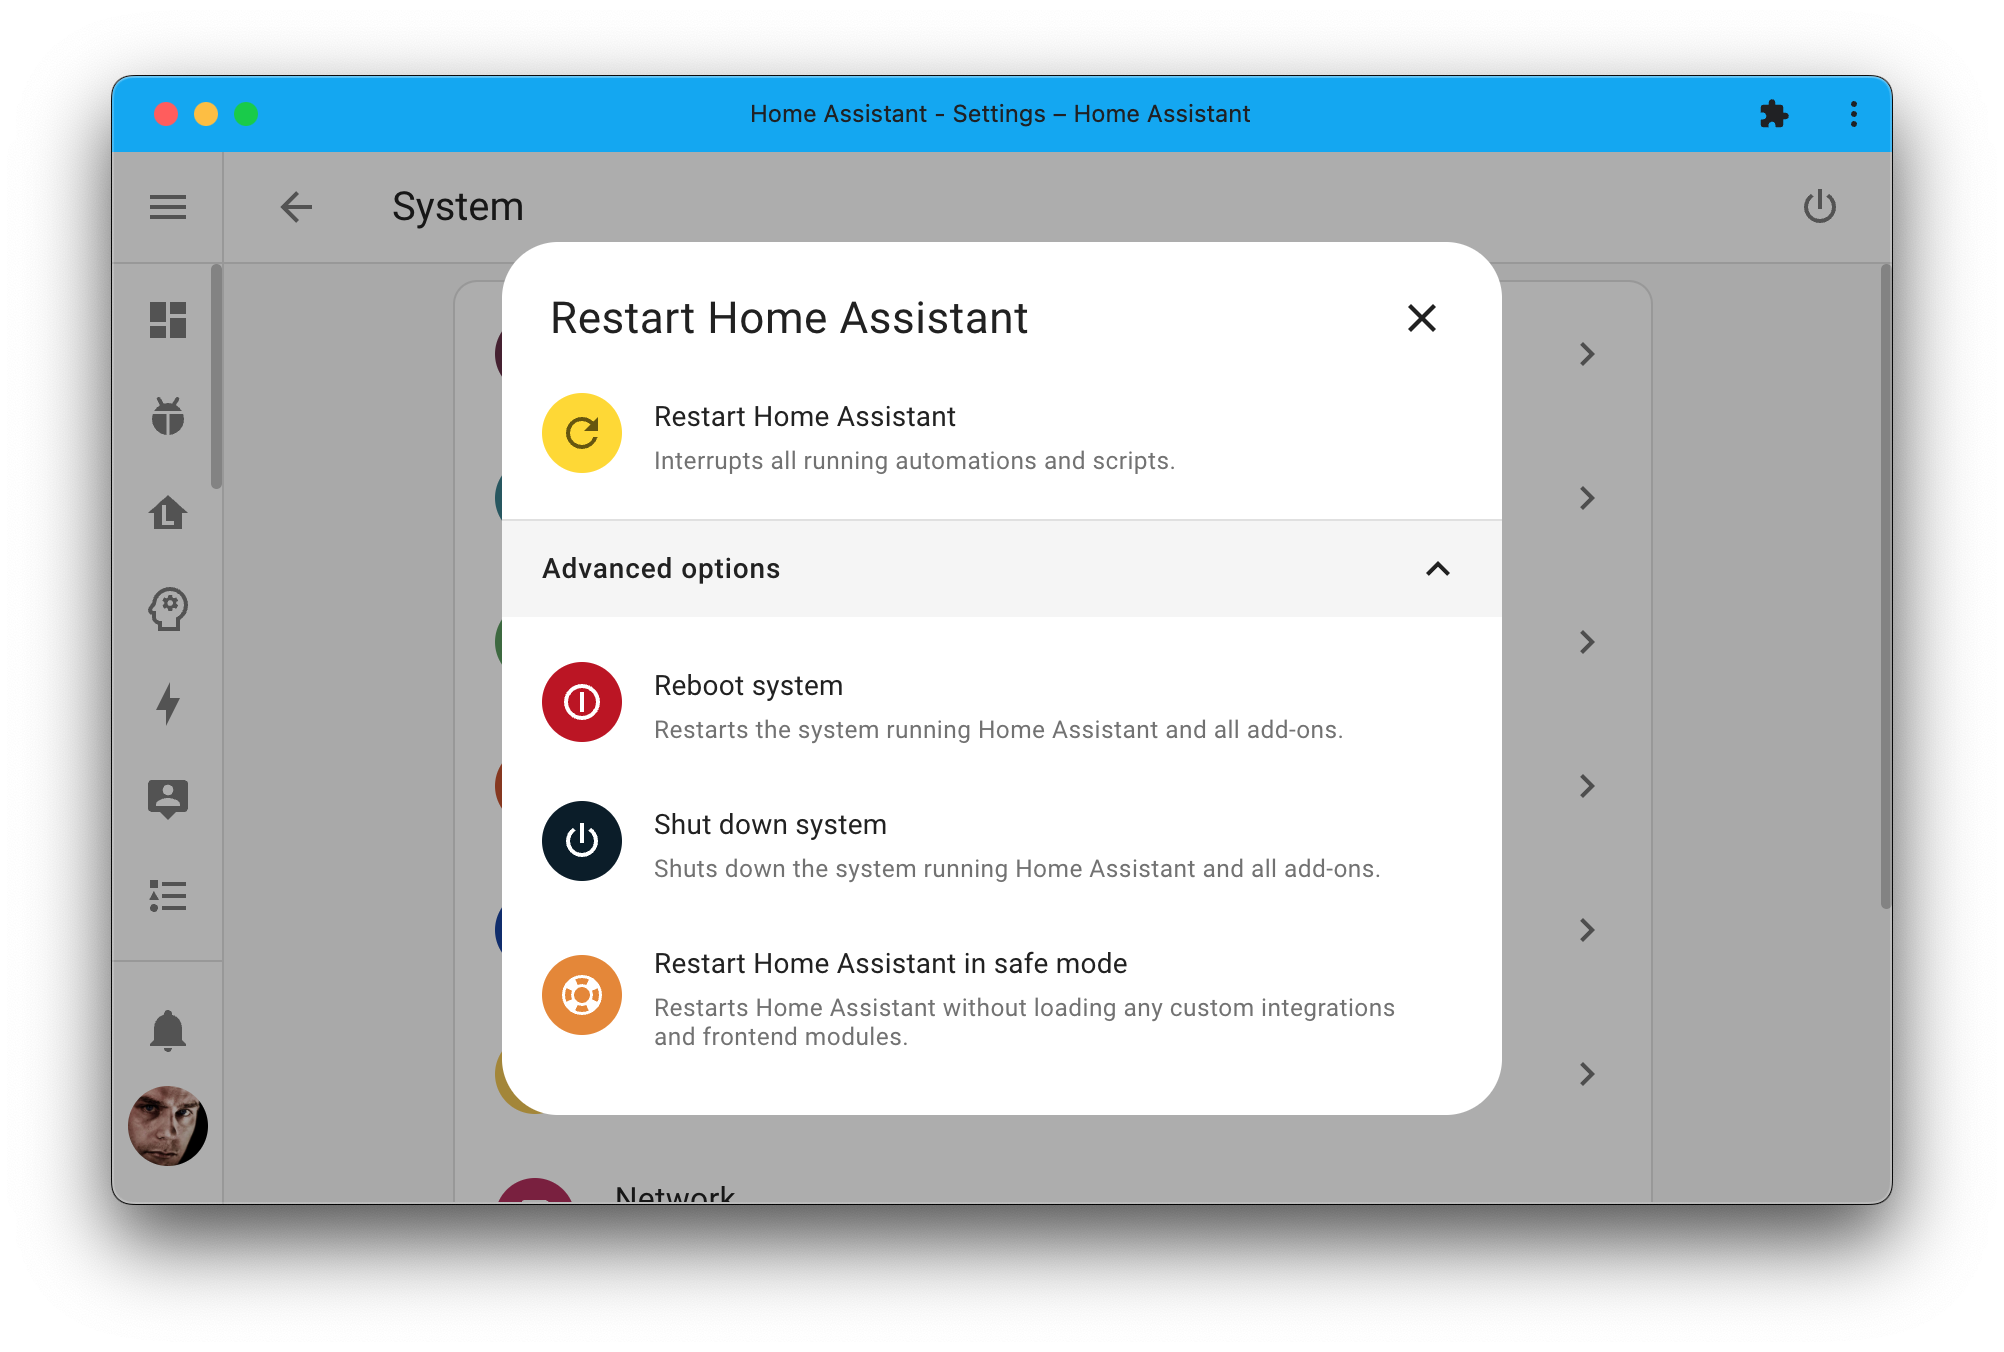 Screenshot showing the restart dialog, which now provides a new option: Restart Home Assistant in safe mode.